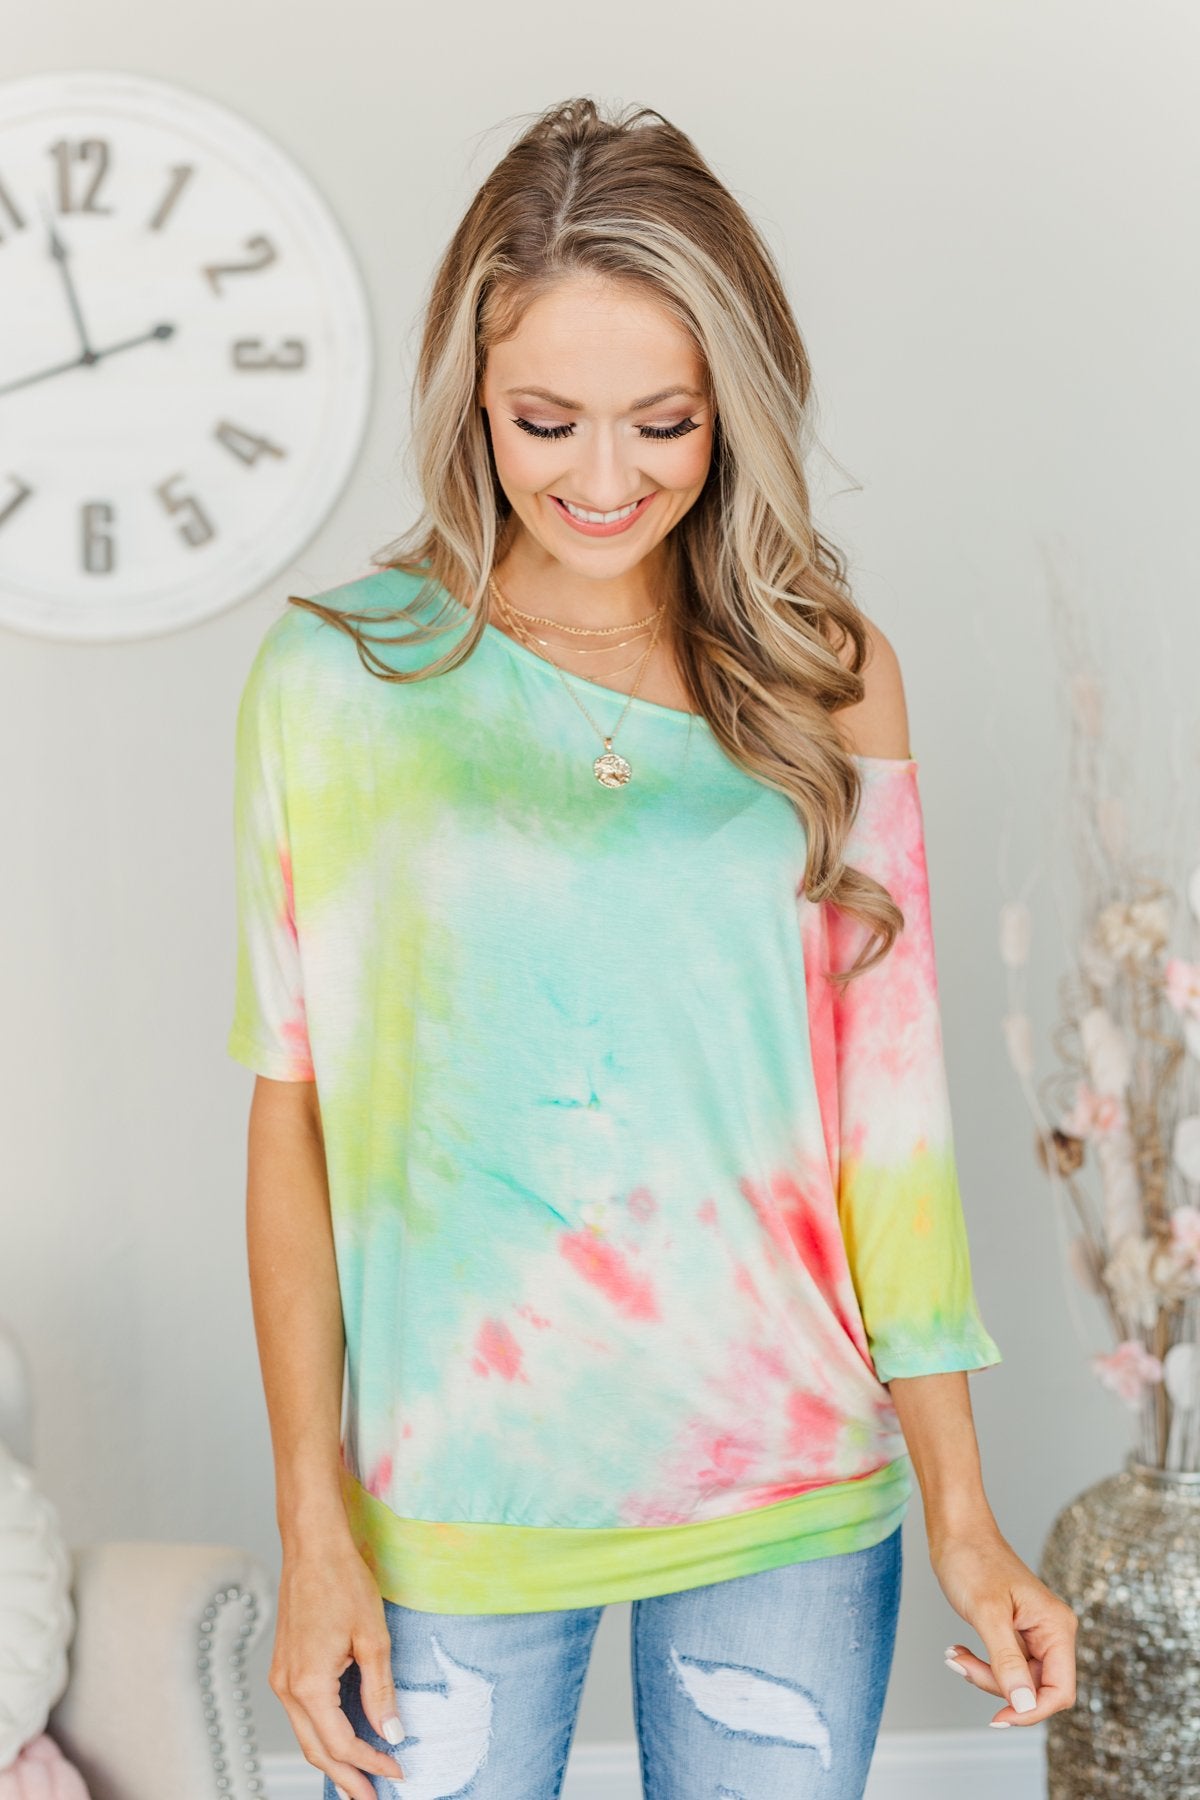 Days With You Tie-Dye Top- Red, Yellow & Aqua – The Pulse Boutique